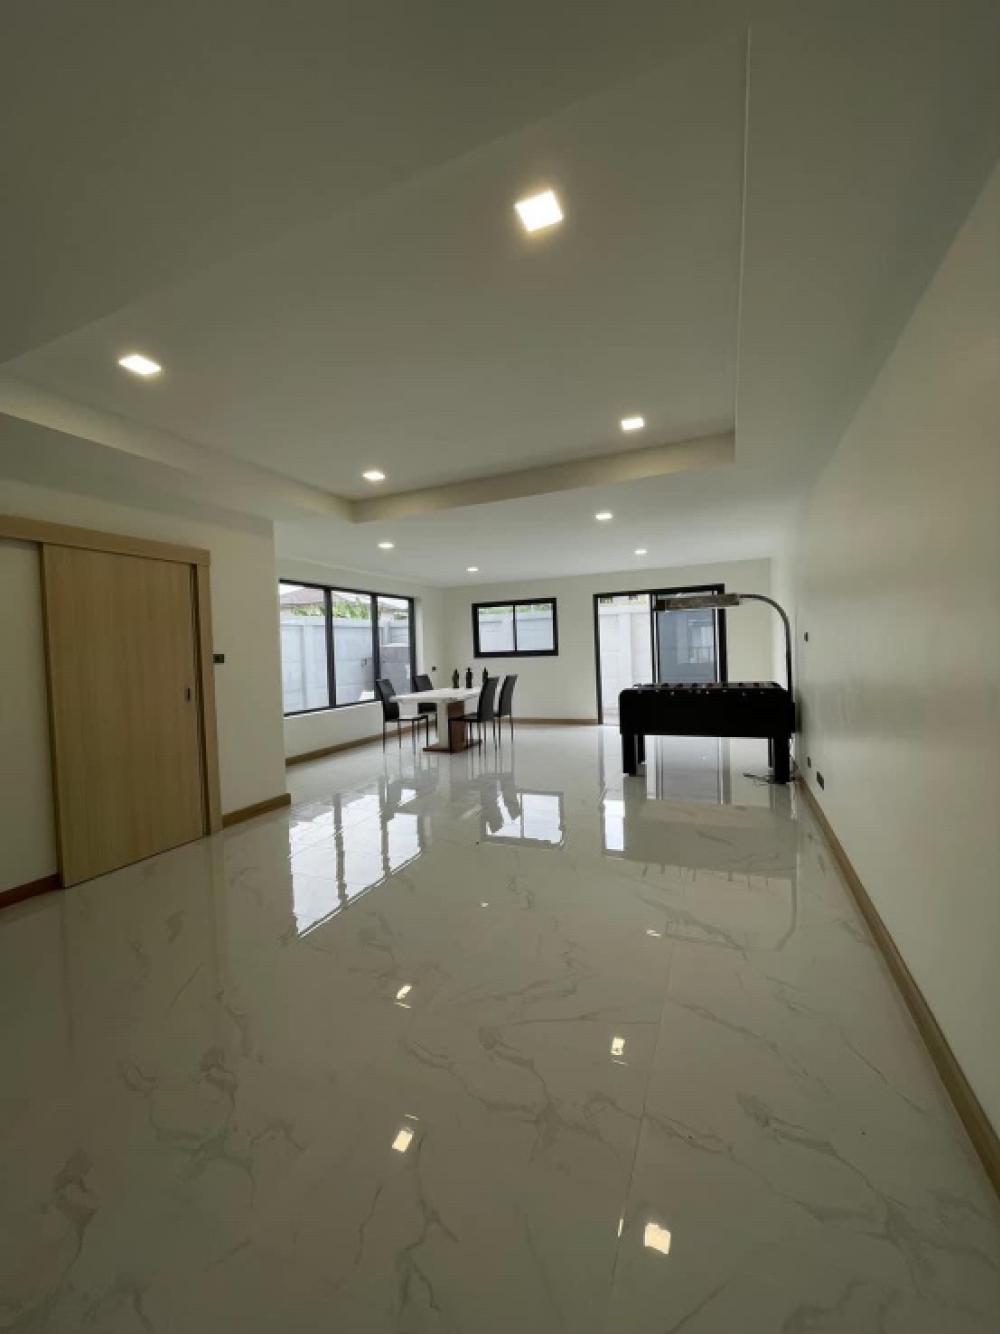 For RentHome OfficeNawamin, Ramindra : Rent/Sale Office, The Harmony Ramintra 62: 48.1 sq.w.: usable area 305 excluding sides: 4 floors, width 8.7, depth 18 meters: air conditioning throughout